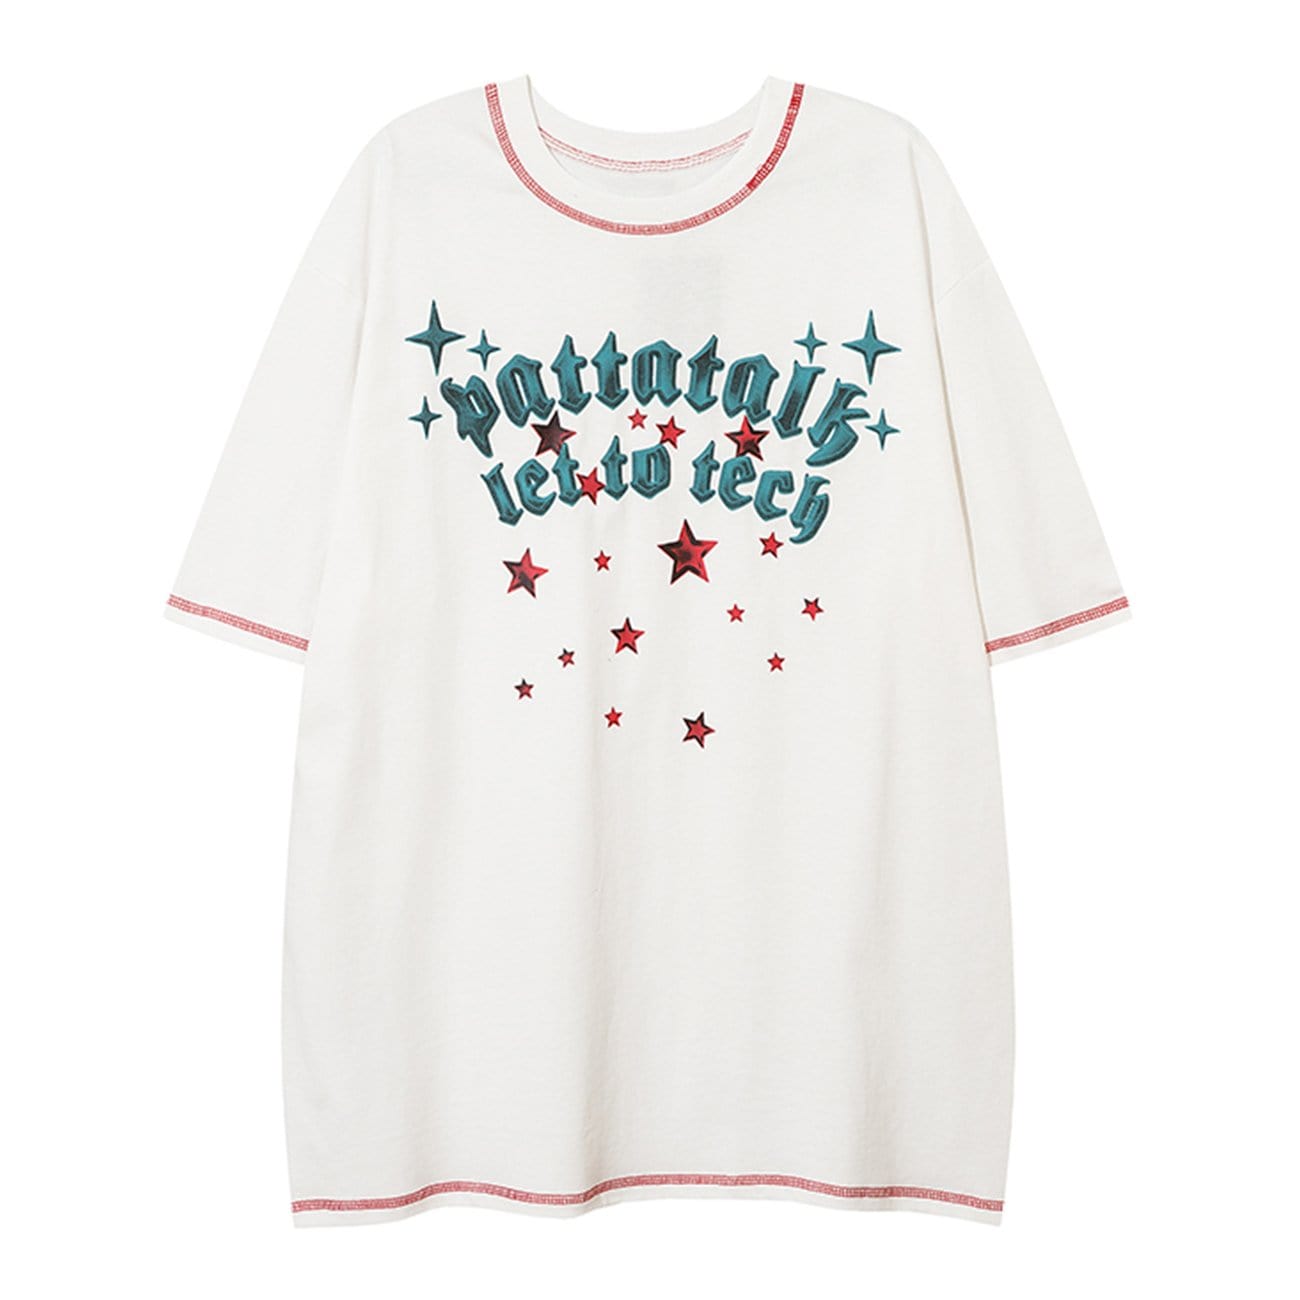 Letter Stars Graphic Tee Streetwear Brand Techwear Combat Tactical YUGEN THEORY